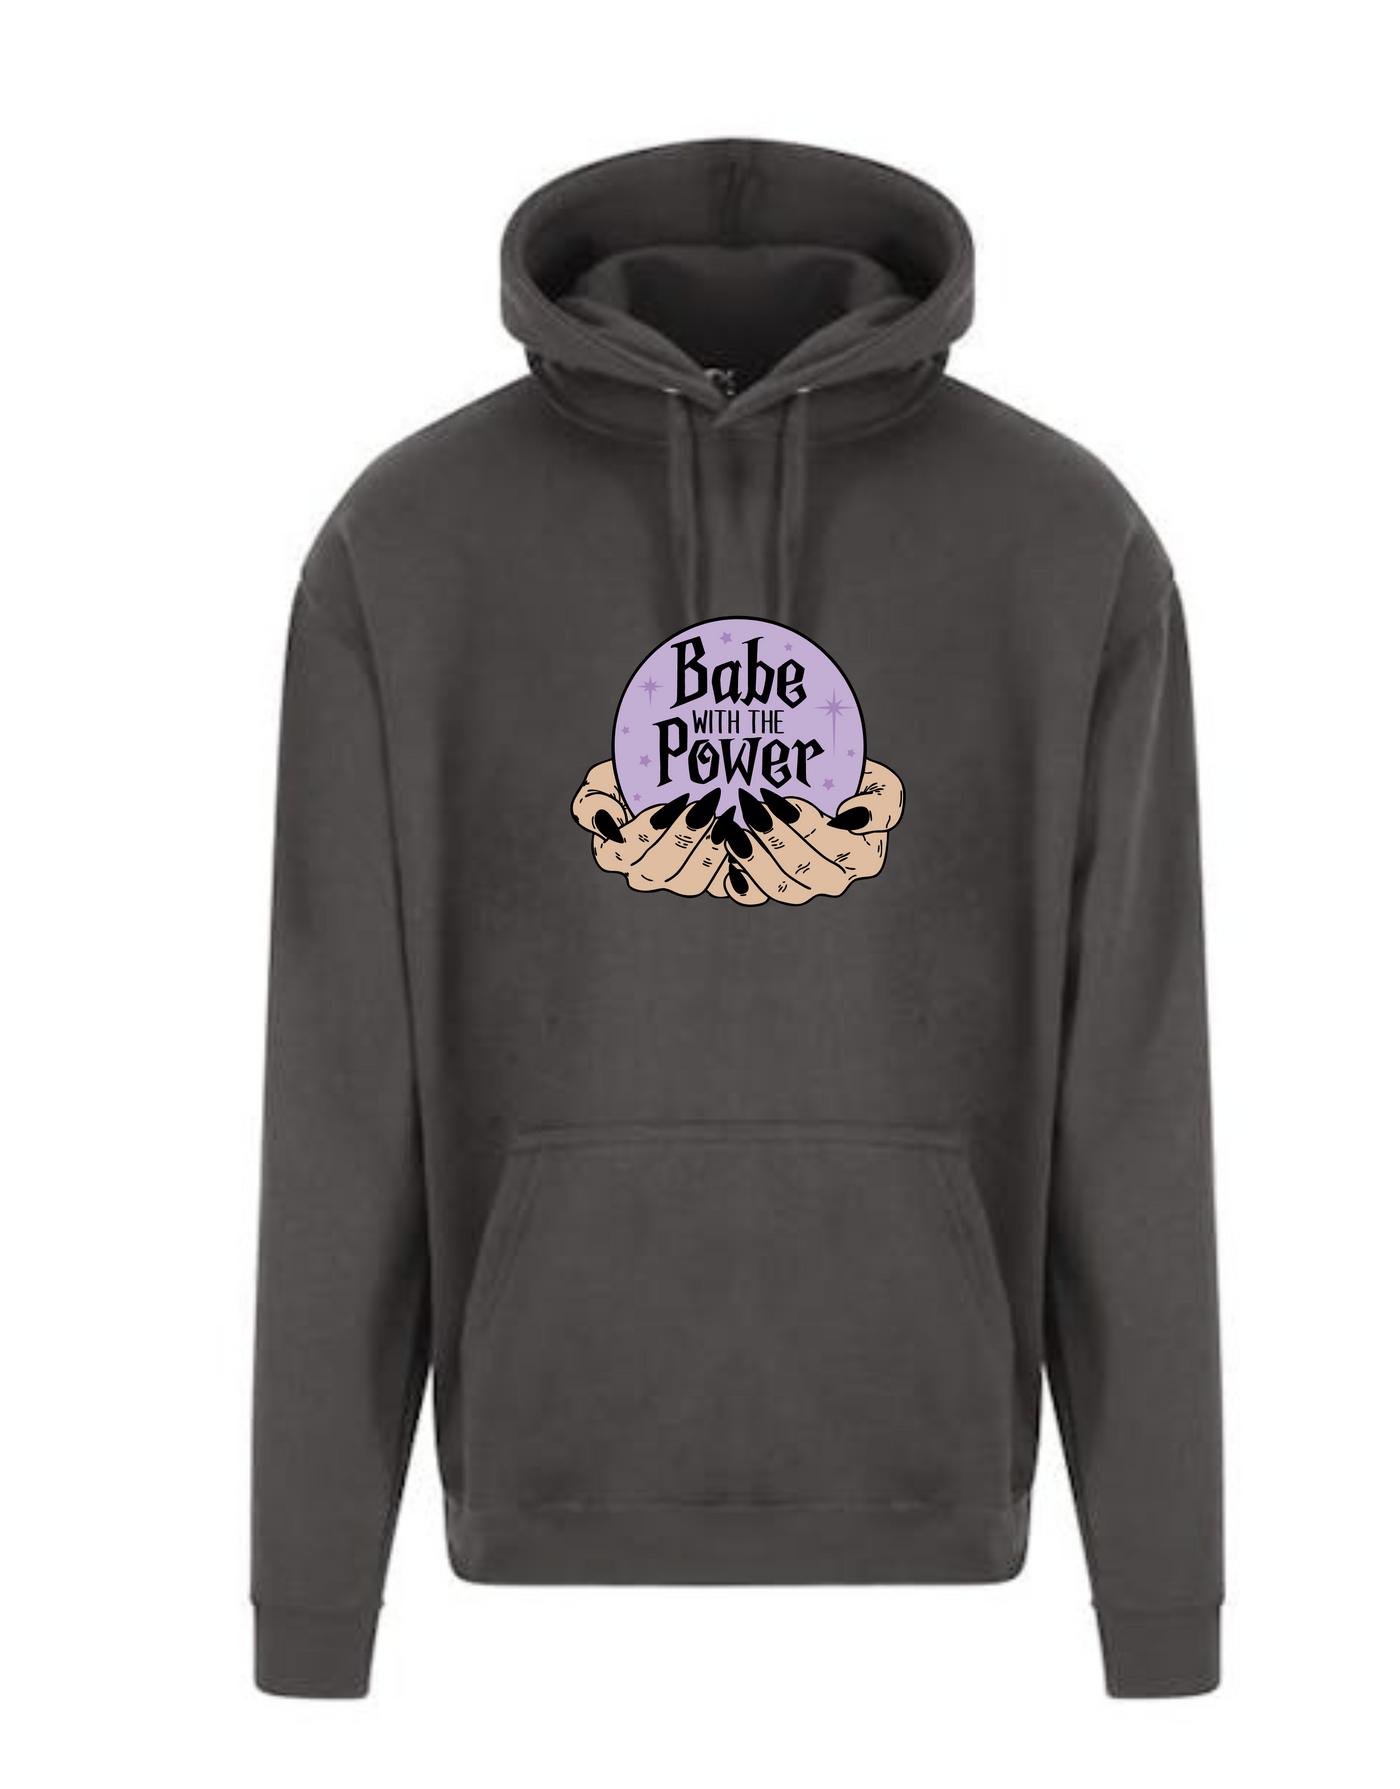 "Babe With The Power" Longline Unisex Hoodie